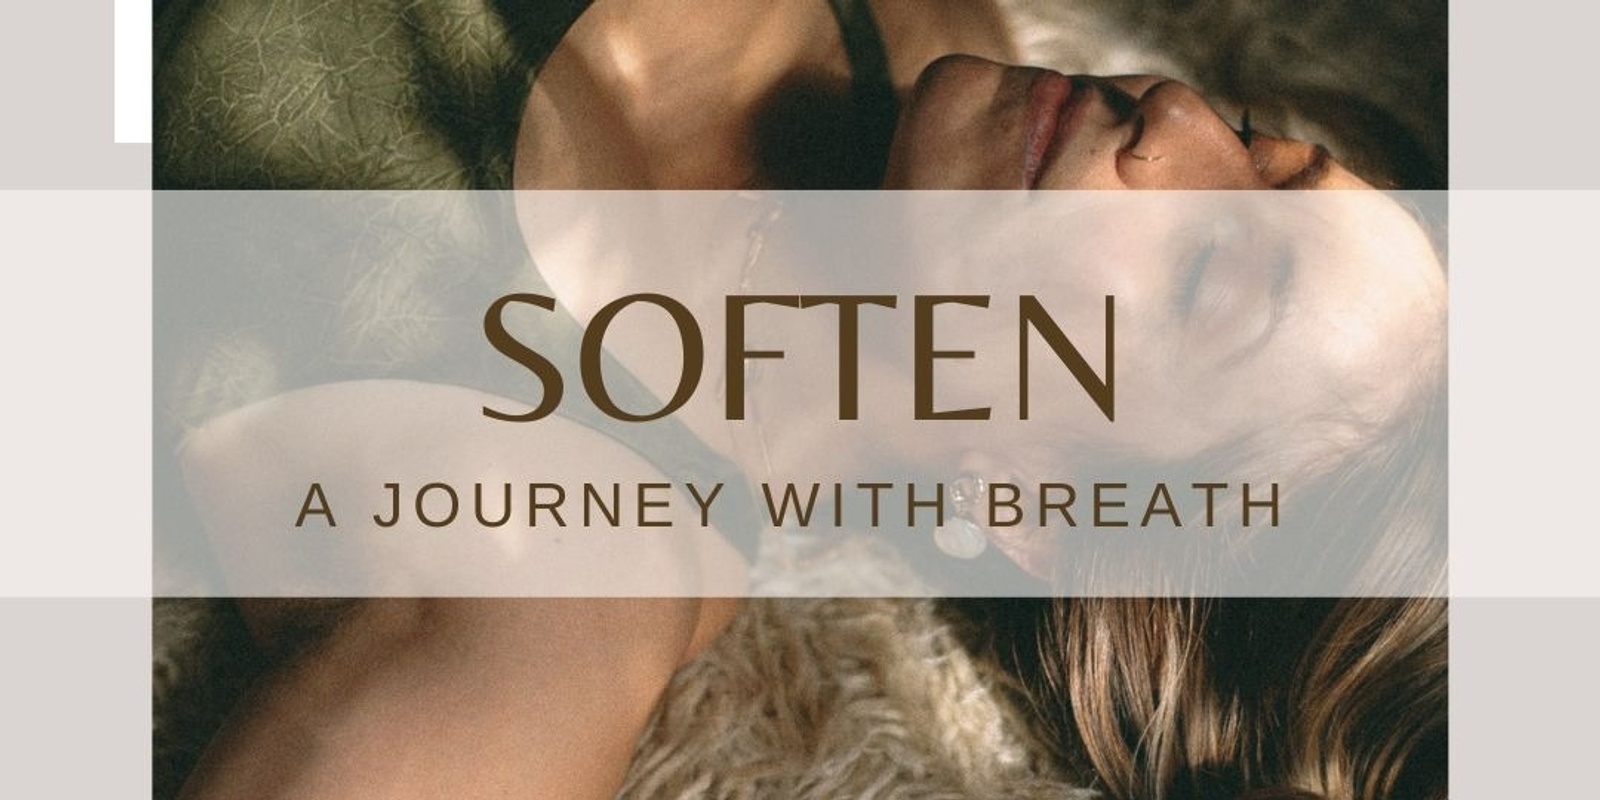 Soften- A Journey with Breath